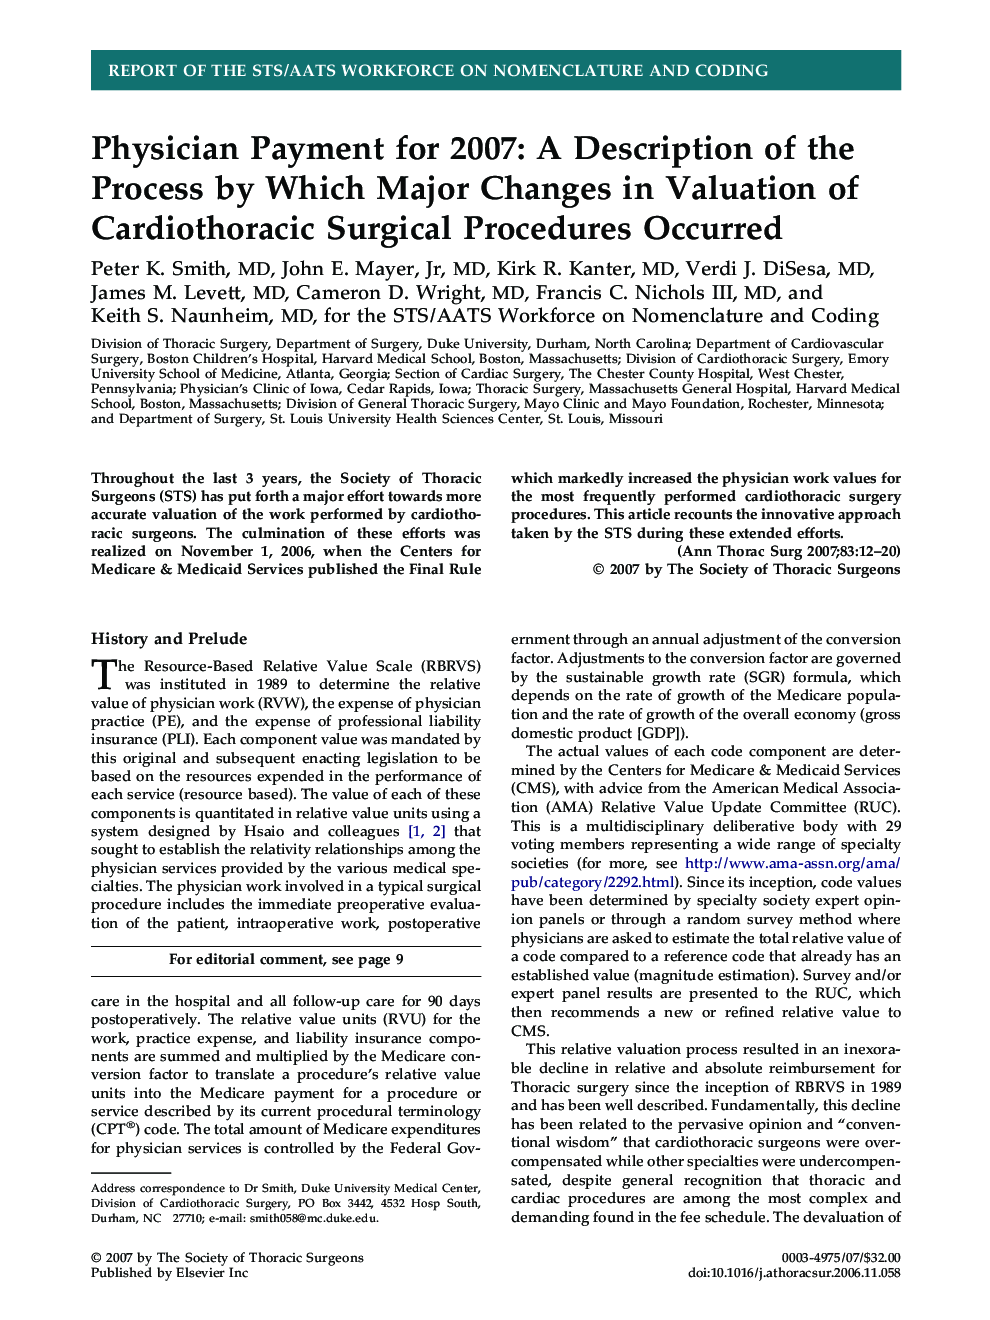 Physician Payment for 2007: A Description of the Process by Which Major Changes in Valuation of Cardiothoracic Surgical Procedures Occurred